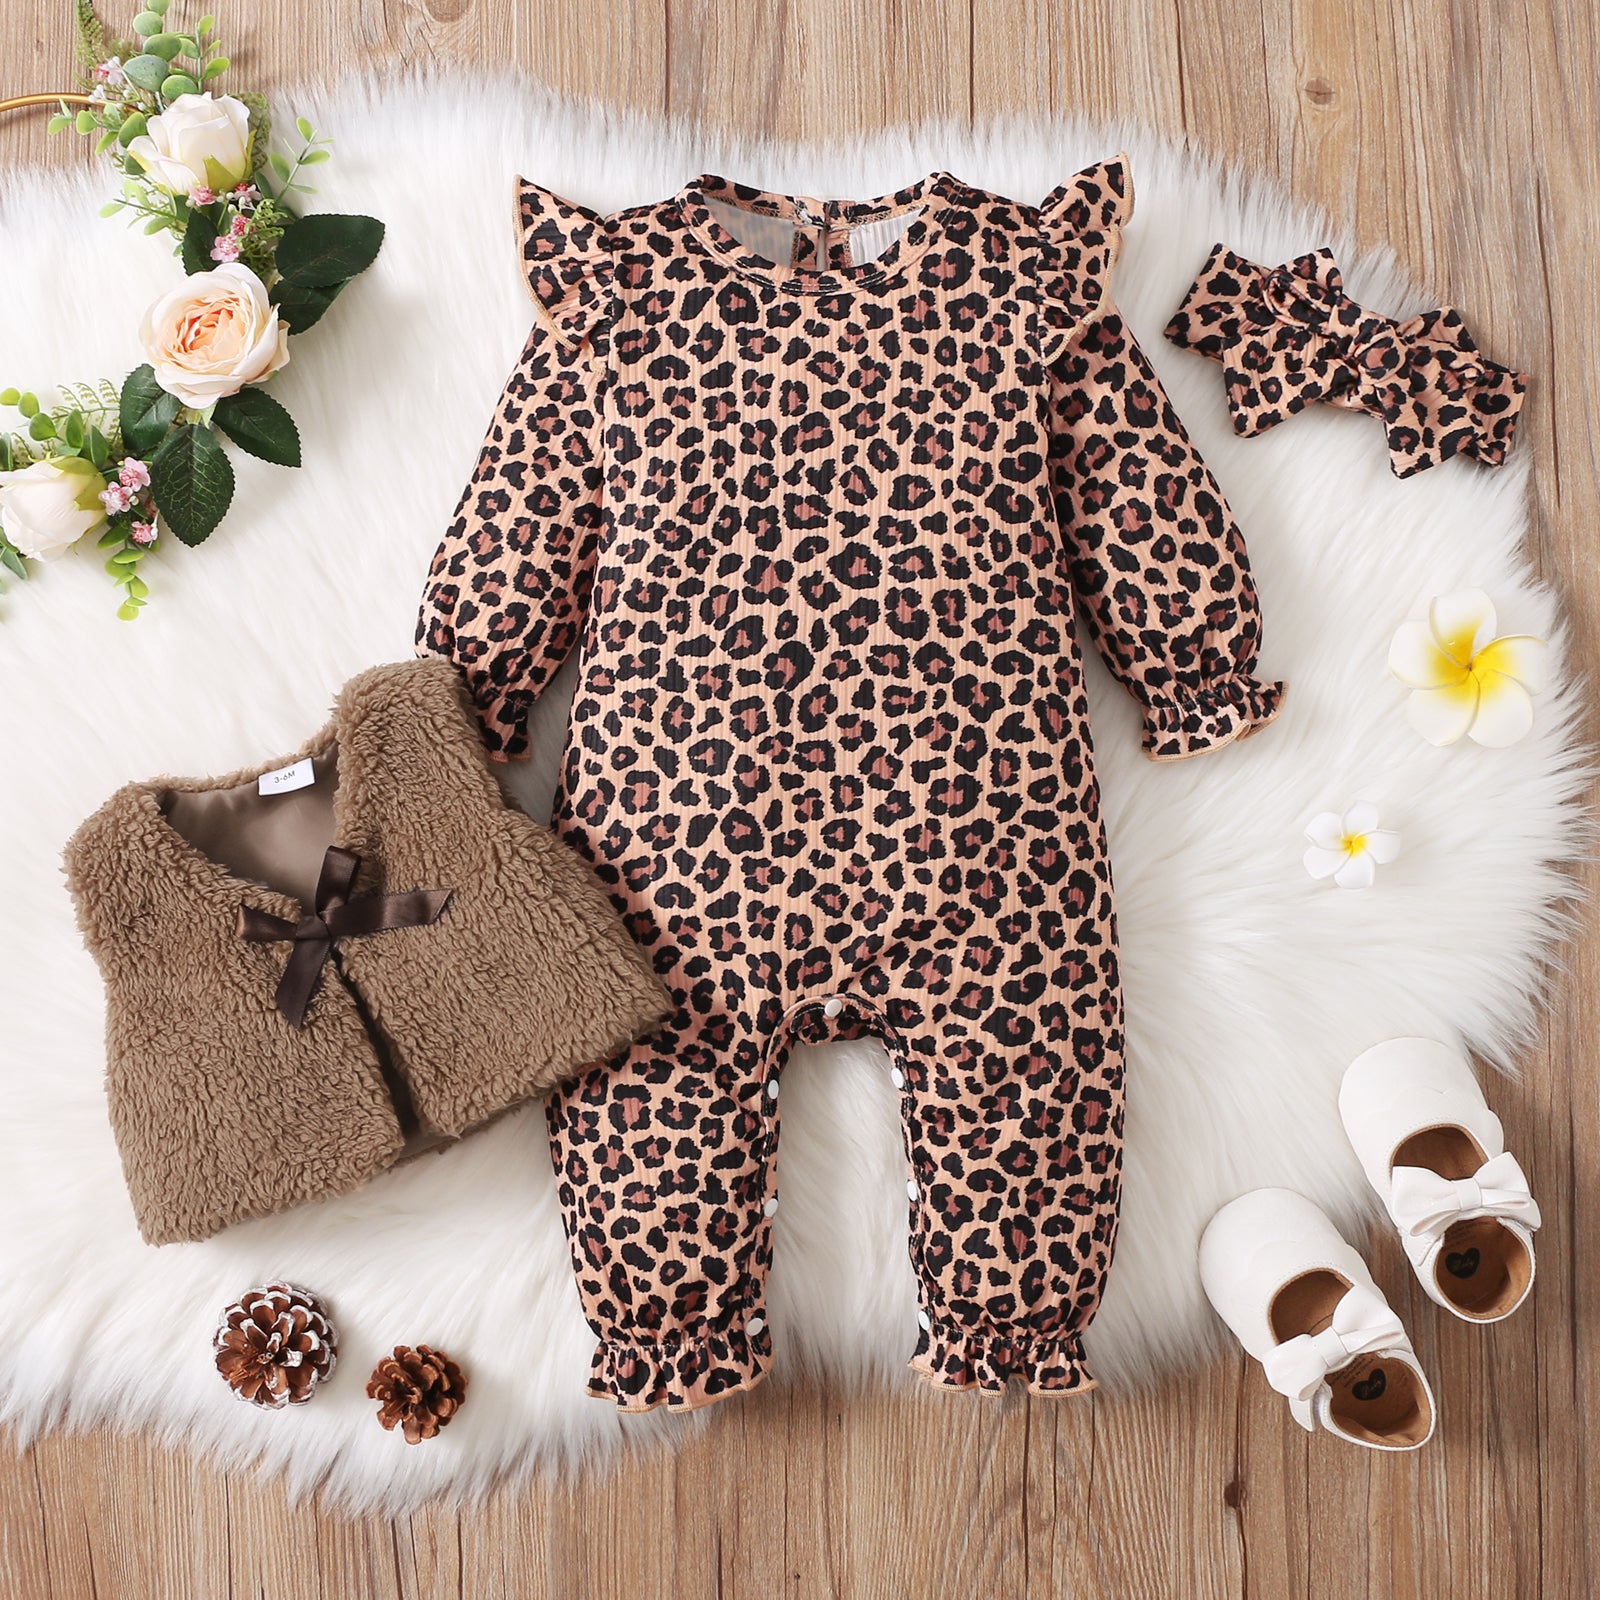 3pcs Baby All Over Leopard Long-sleeve Jumpsuit and Fuzzy Fleece Vest Set